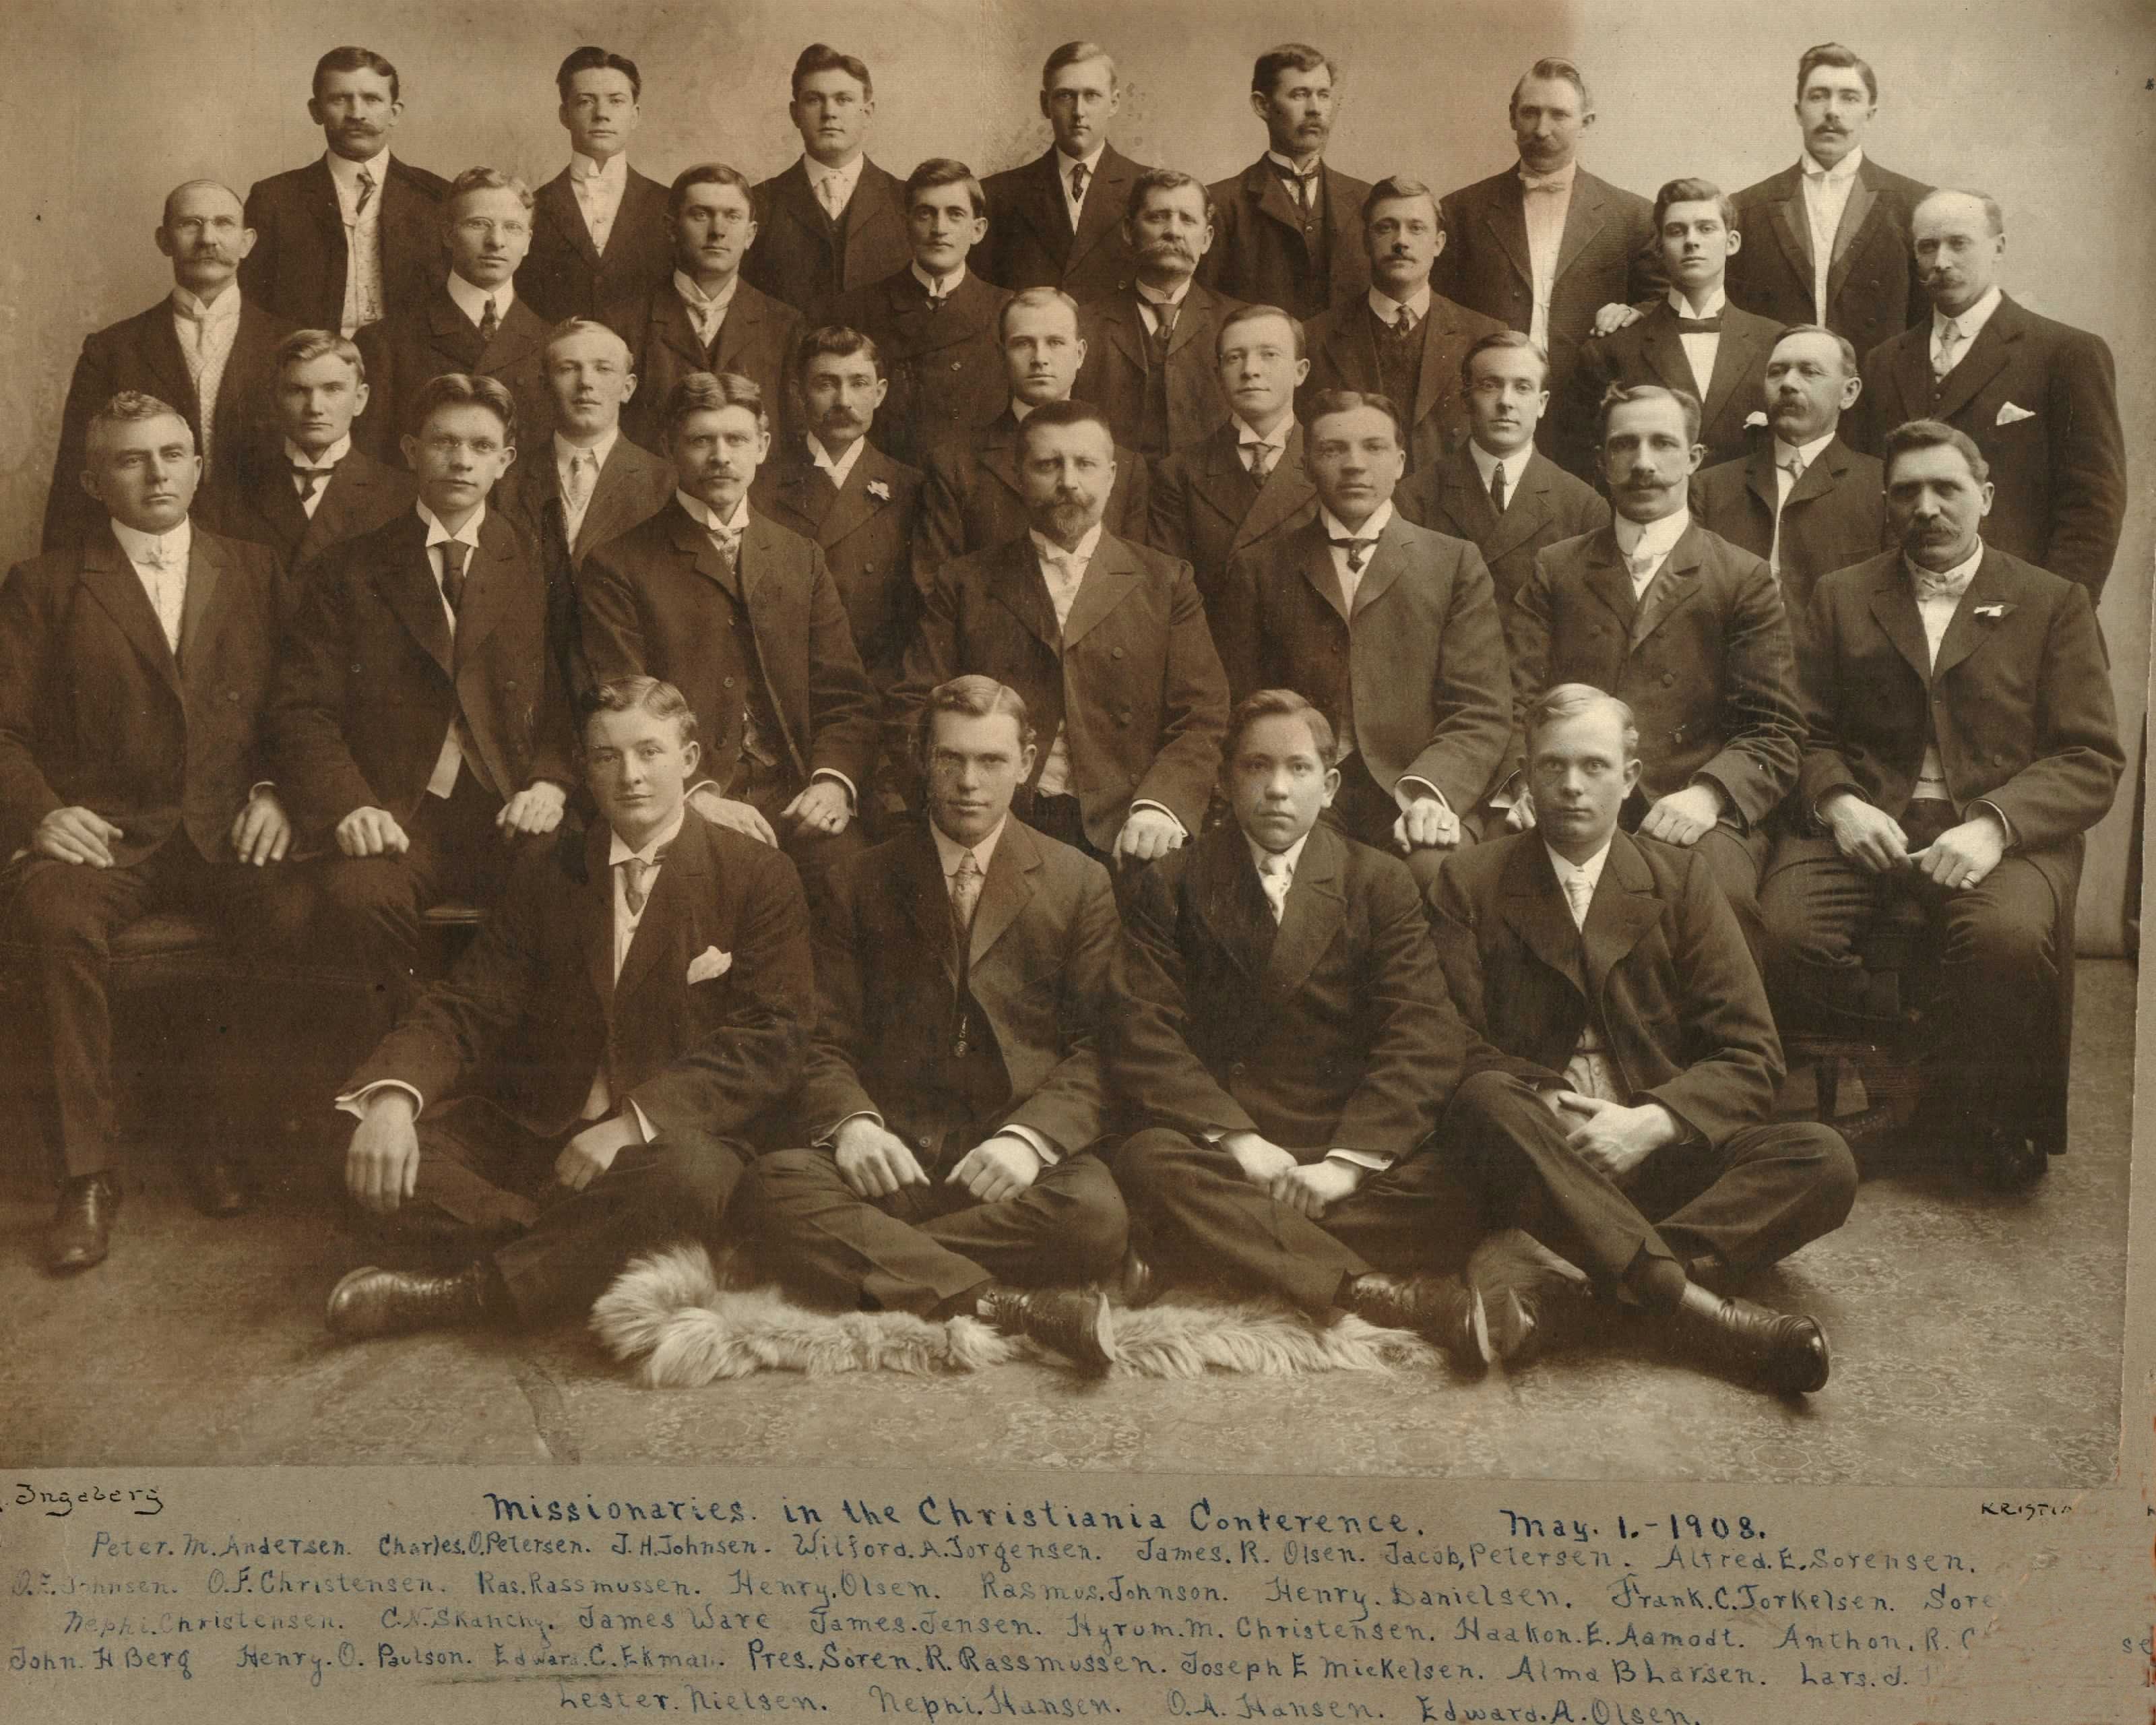 Missionaries in the Christiania Conference, May 1, 1908